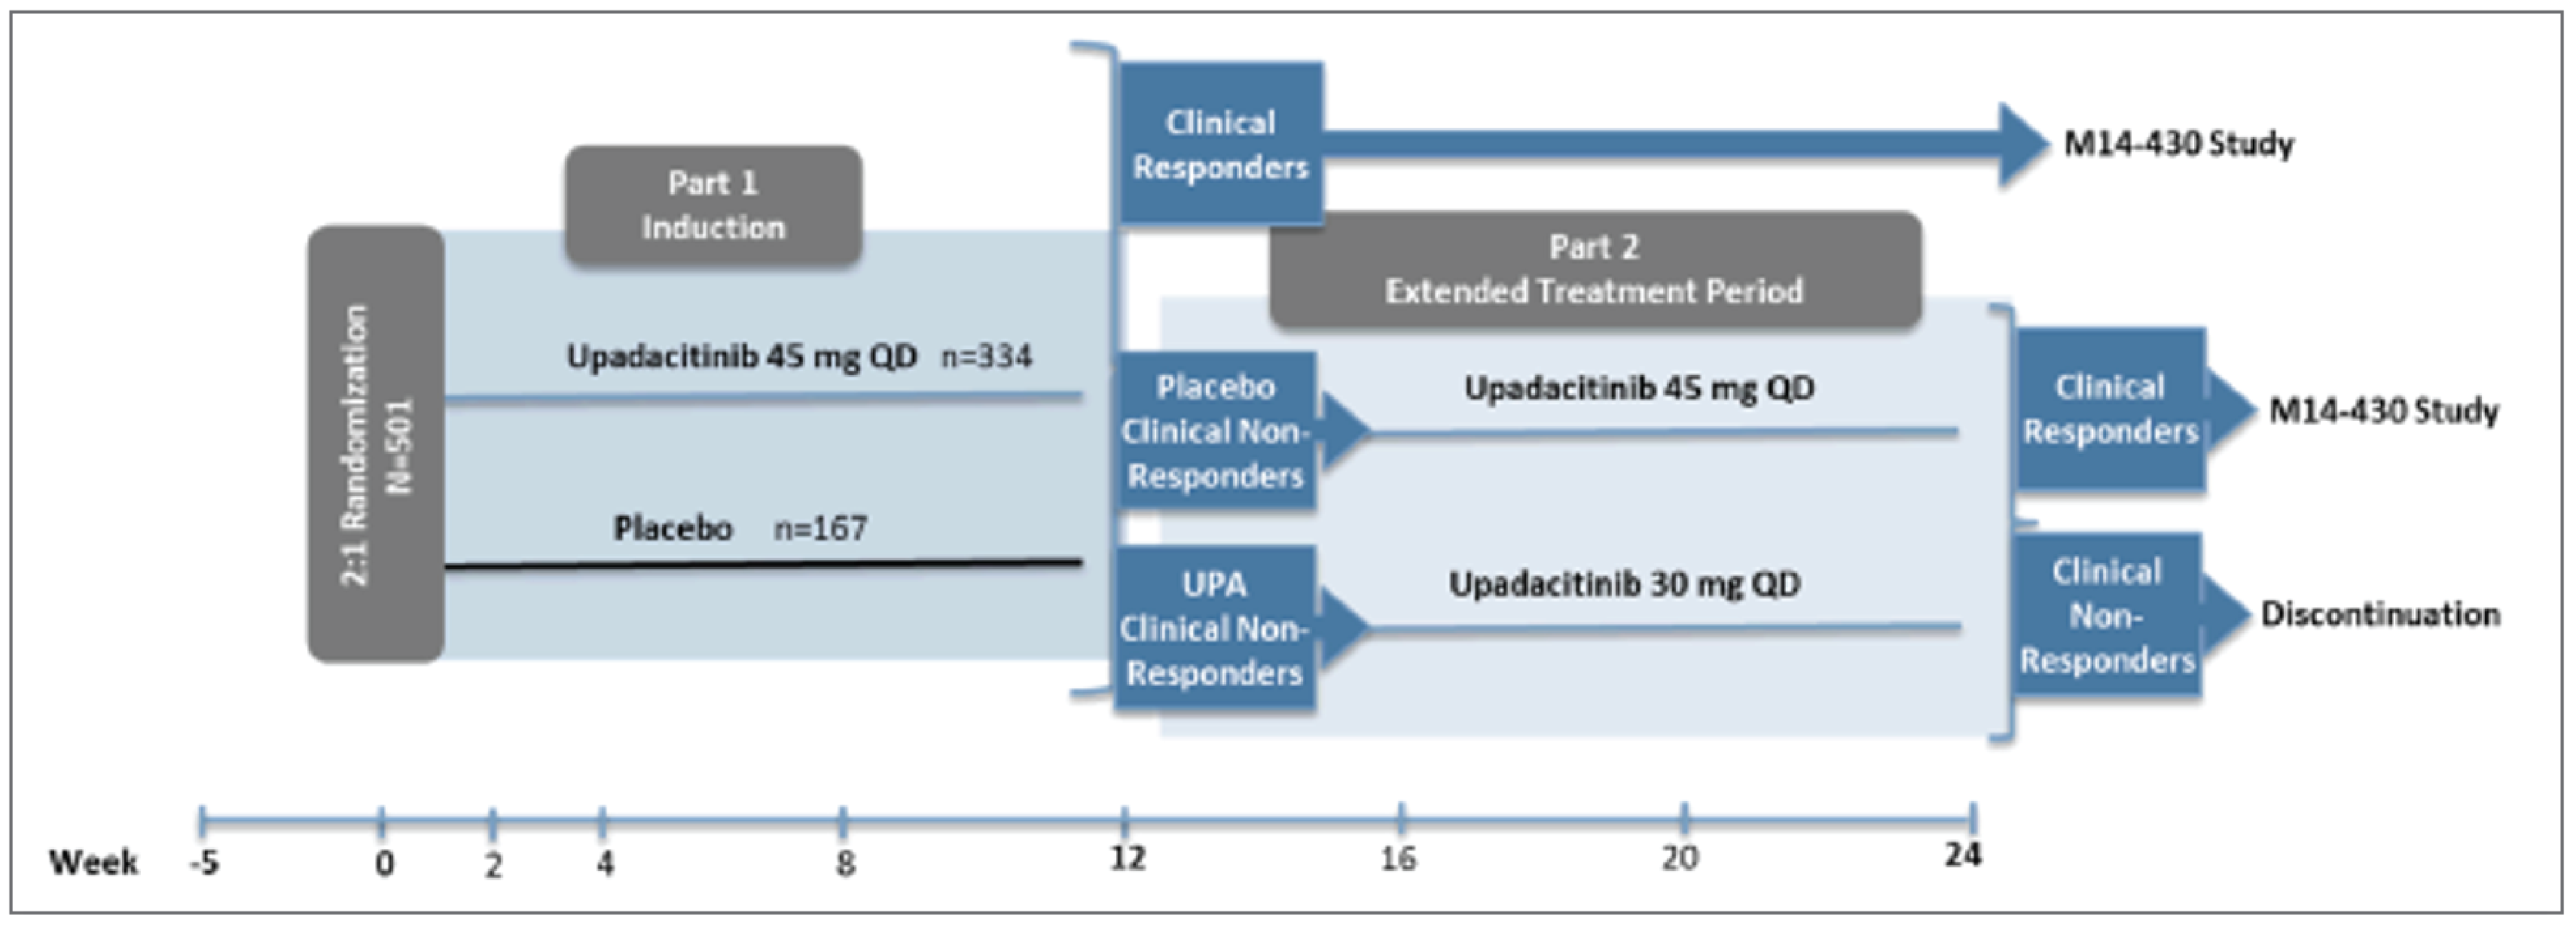 A flow diagram depicting the design of U-EXCEL. Patients in part 1, which was double-blinded and 12 weeks long, were randomized 2:1 to upadacitinib 45 mg once daily (n = 334) or placebo (n = 167). Clinical responders in part 1 could move on to the M14 to 430 (U-ENDURE) maintenance study. Nonresponders moved on to part 2, the 12-week extended treatment period of the U-EXCEL trial; patients who had initially received placebo and did not respond would then receive upadacitinib 45 mg once daily, while upadacitinib nonresponders would receive upadacitinib 30 mg once daily. Of the patients in part 2, clinical responders could move on to the M14 to 430 (U-ENDURE) maintenance study. Clinical nonresponders after part 2 were discontinued.